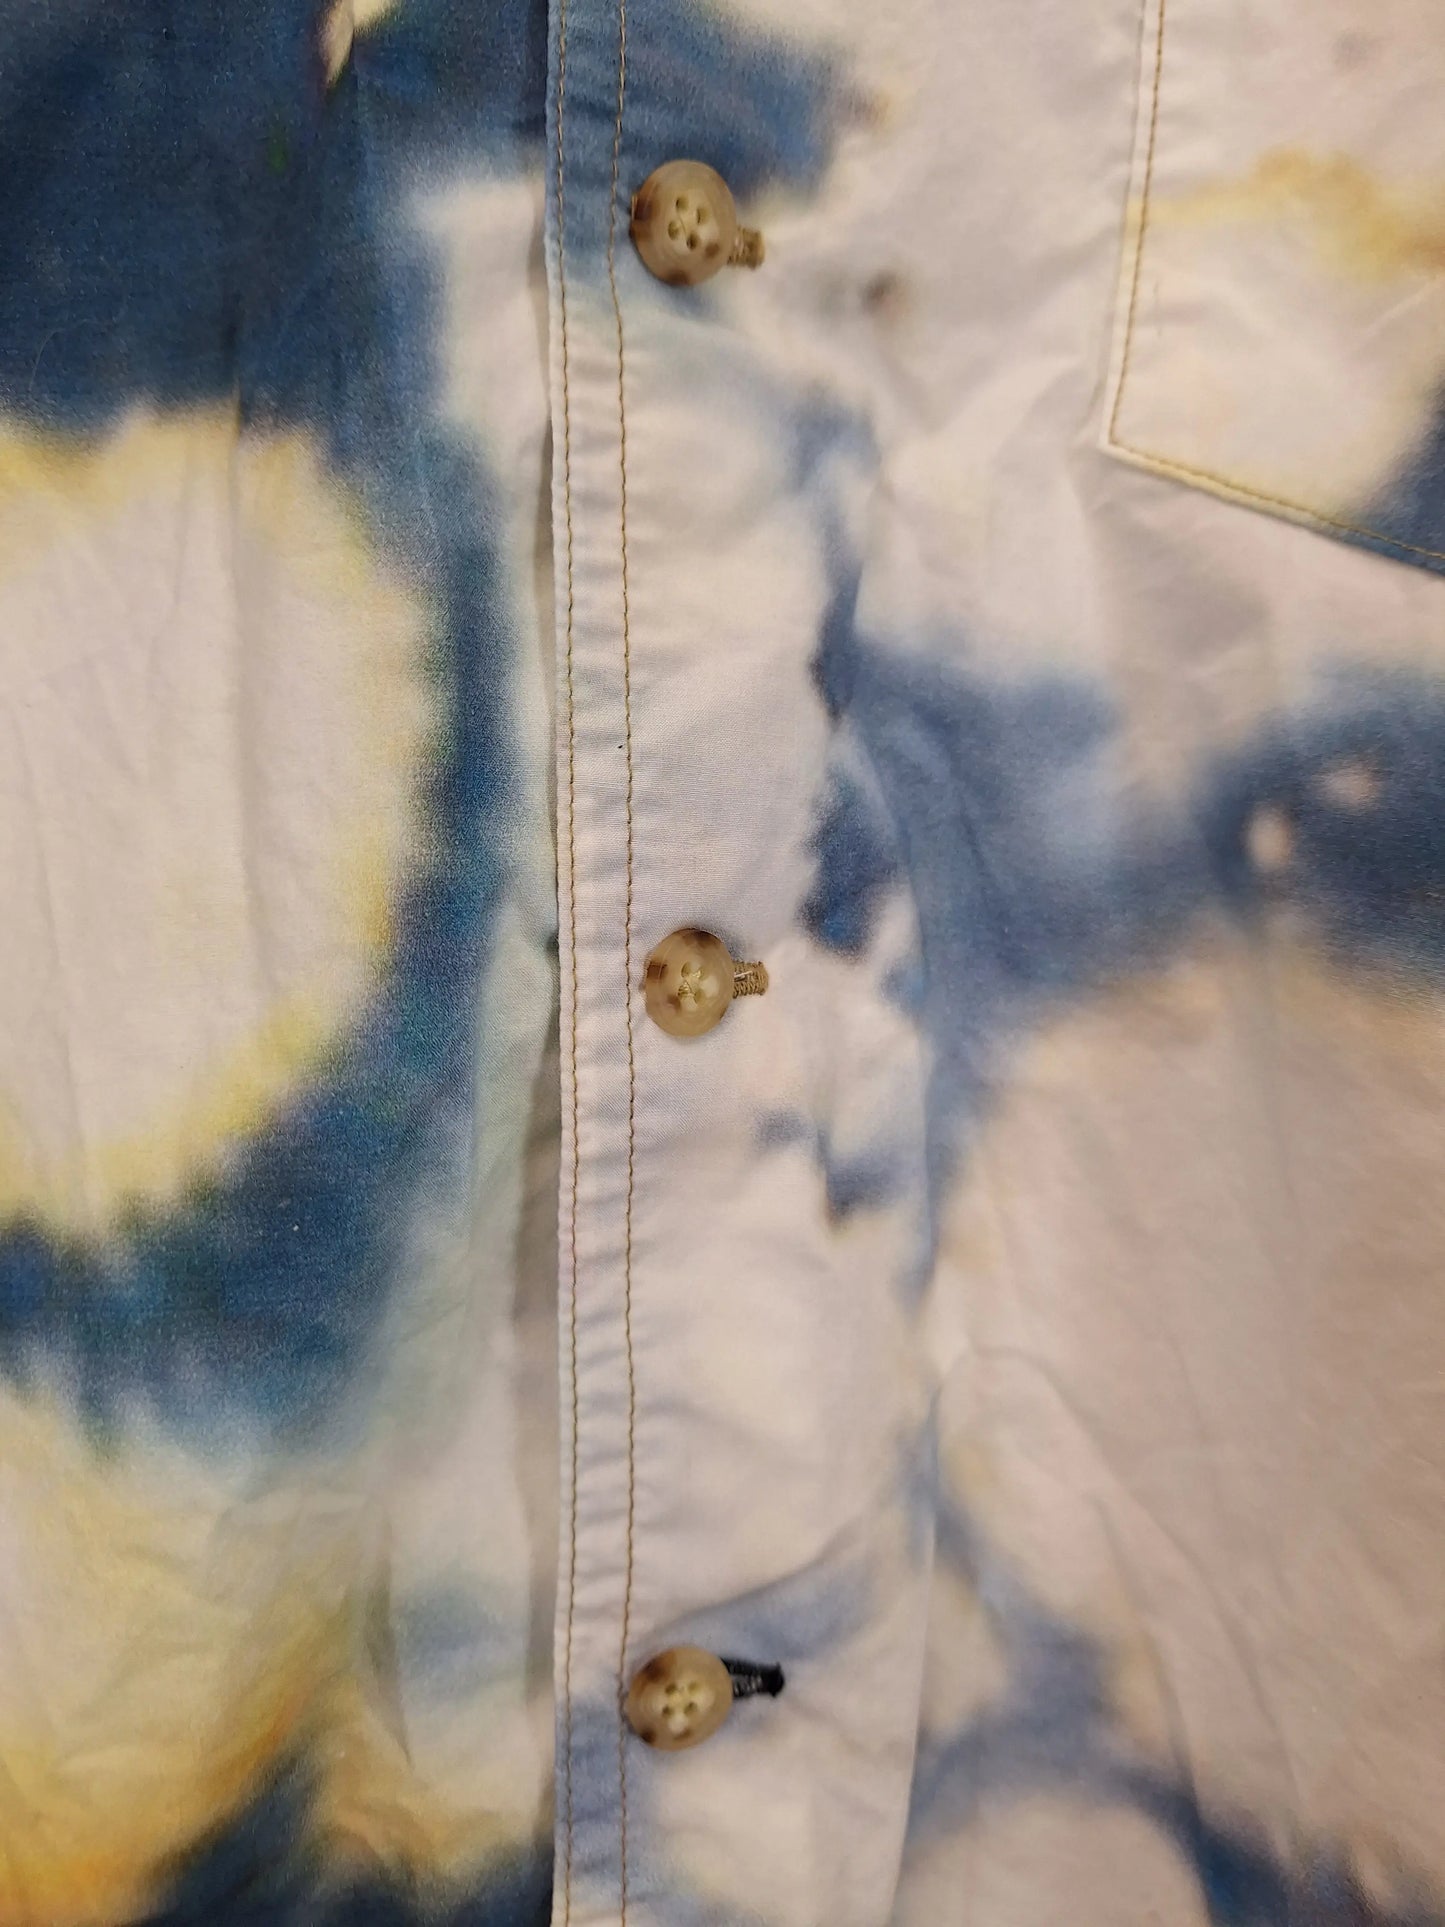 Bassike Tie-dye Collarless Button Down Shirt Size 12 by SwapUp-Online Second Hand Store-Online Thrift Store